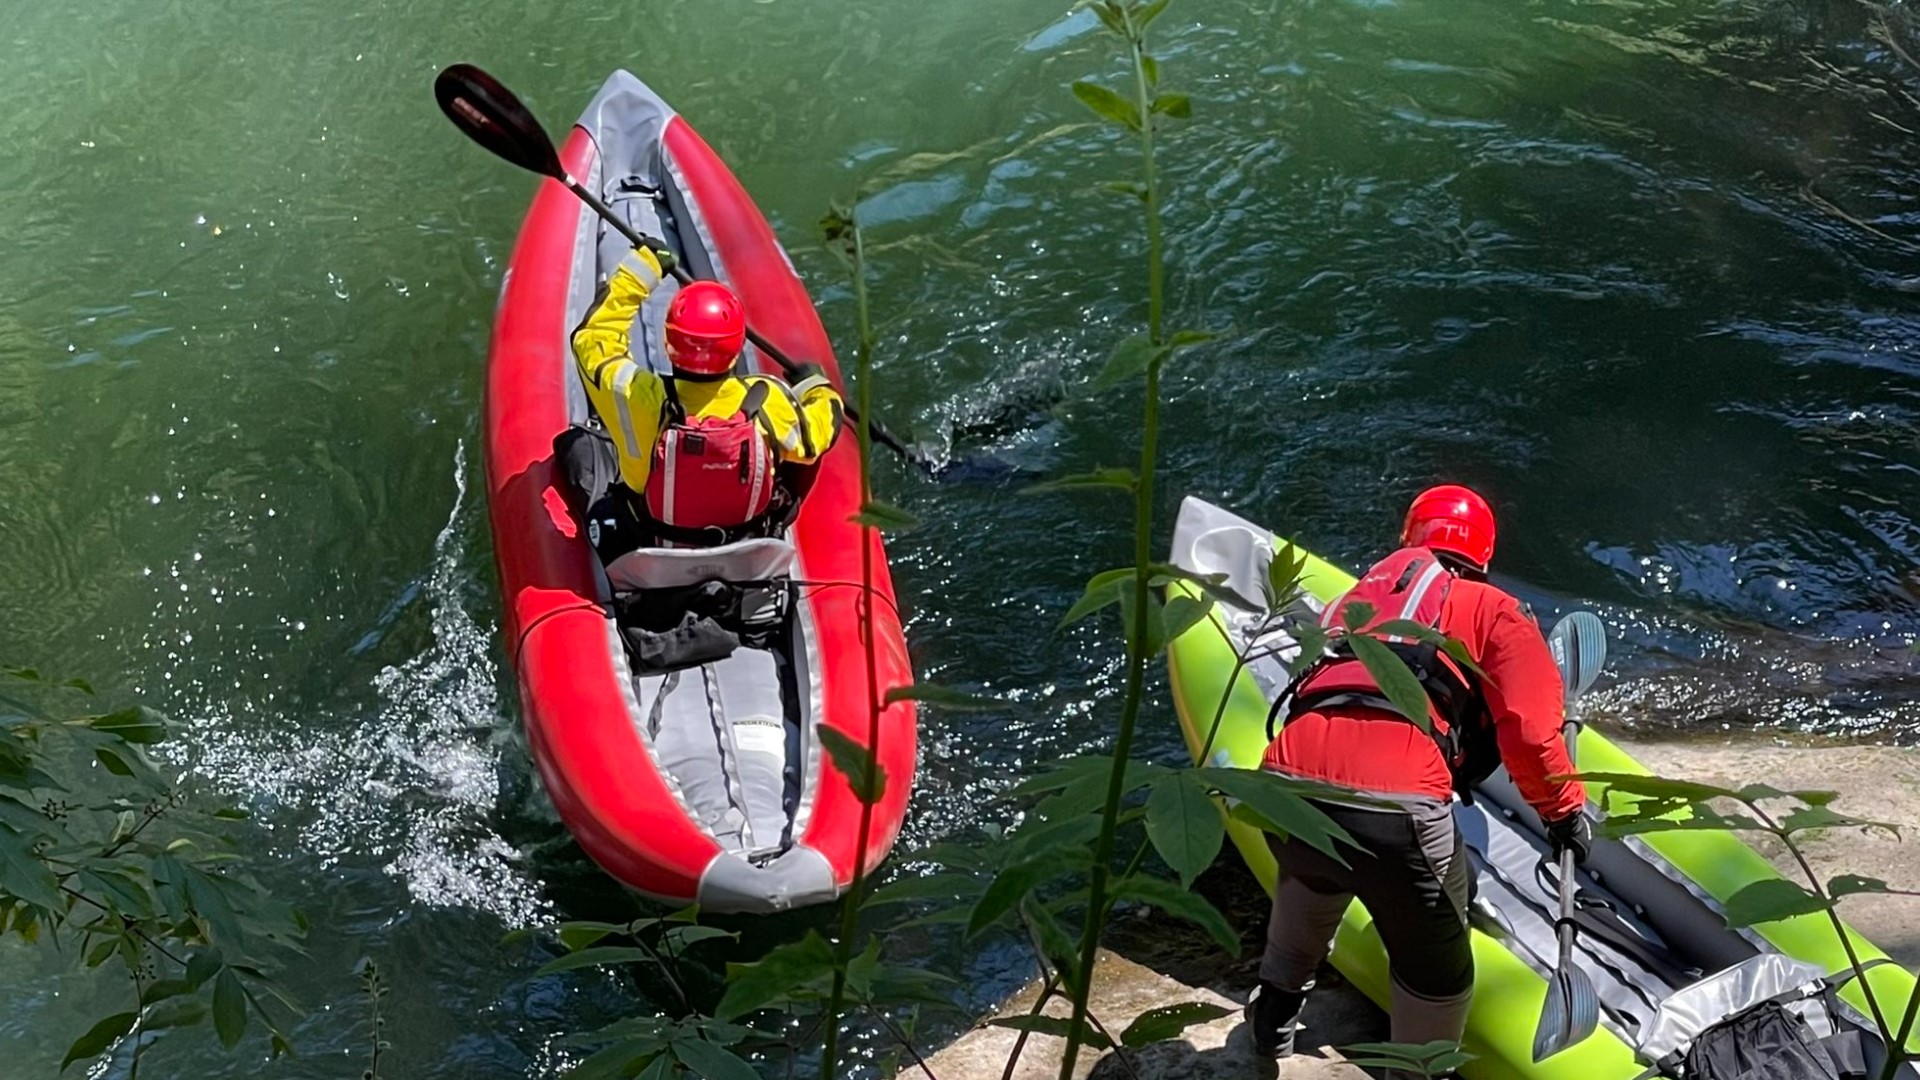 A 20-year-old man is presumed drowned after they went missing at Green River Gorge Saturday afternoon, the King County Sheriff’s Office said.